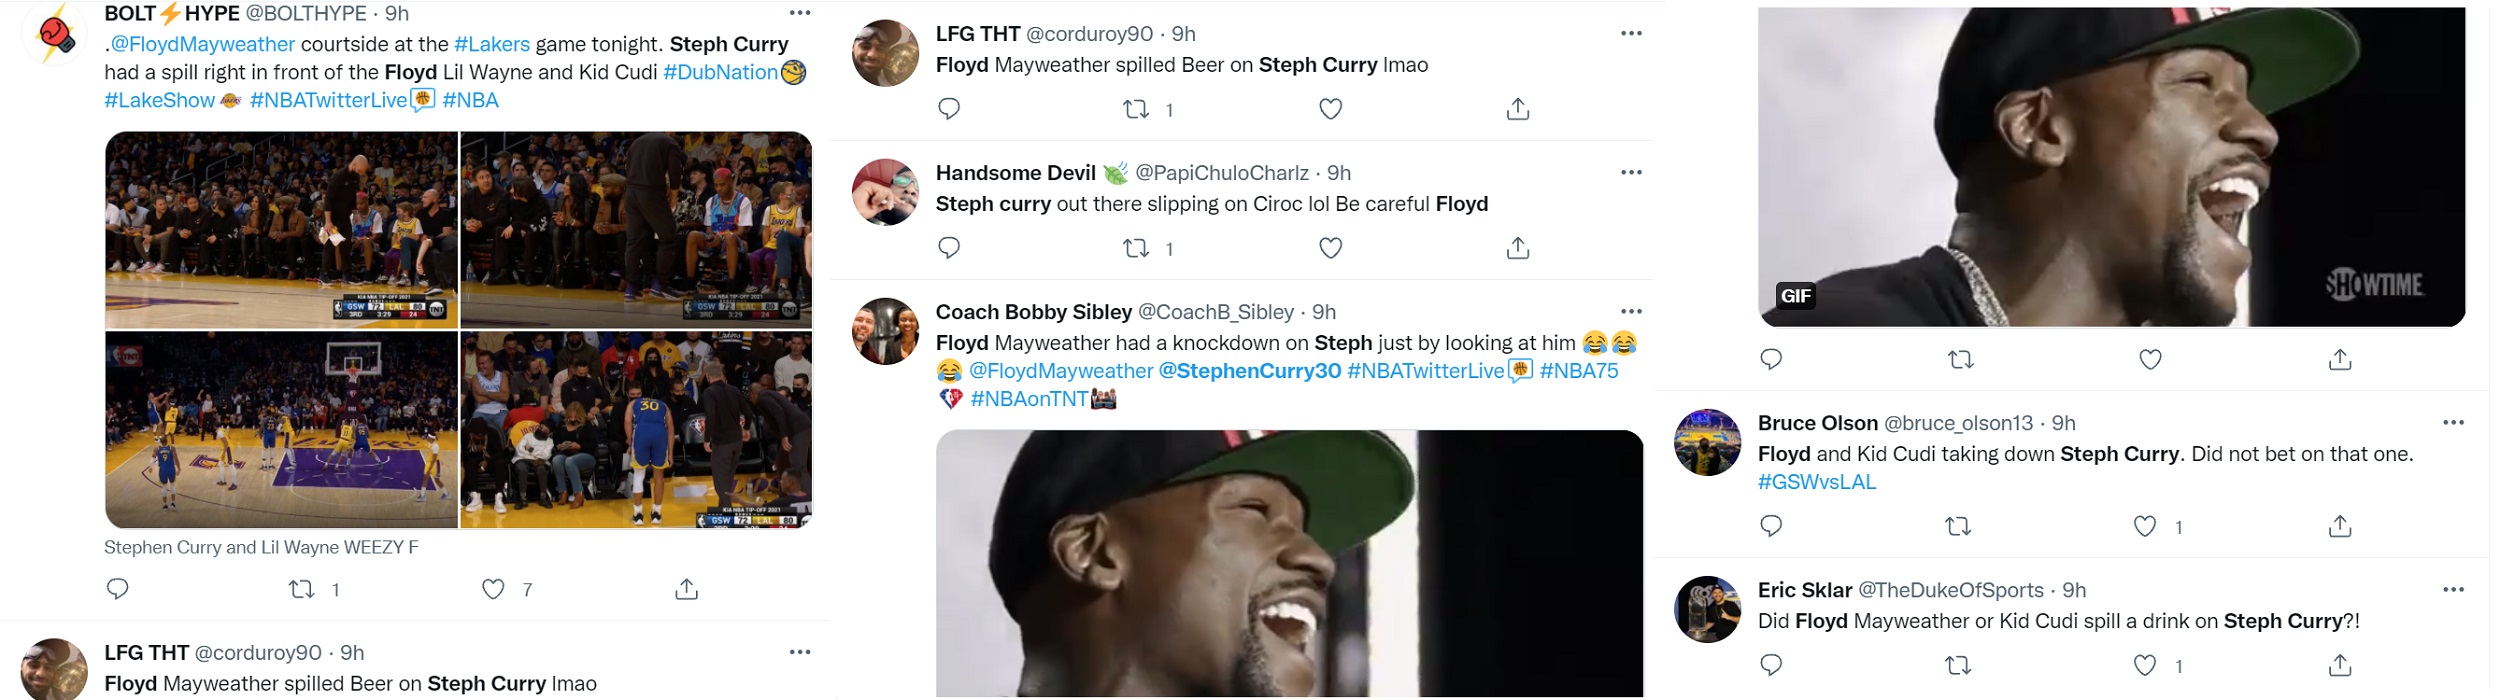 Steph Curry falls in front of Floyd Mayweather and Kid Cudi